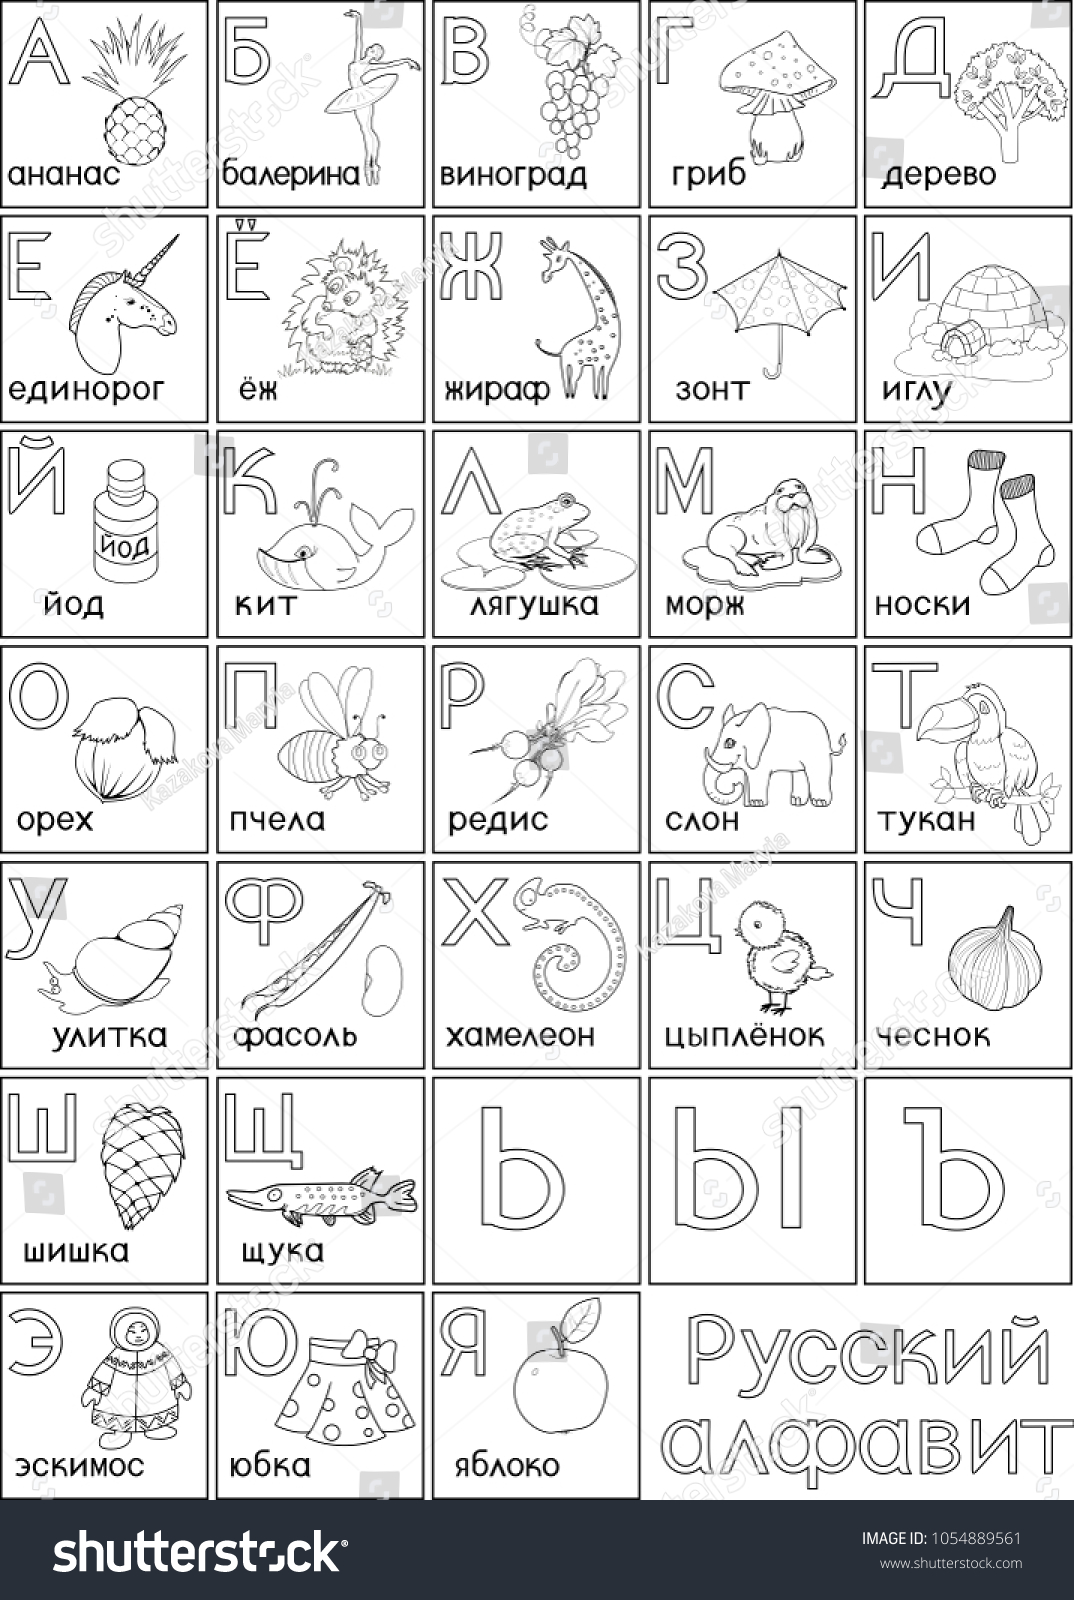 Coloring page russian alphabet pictures titles stock vector royalty free